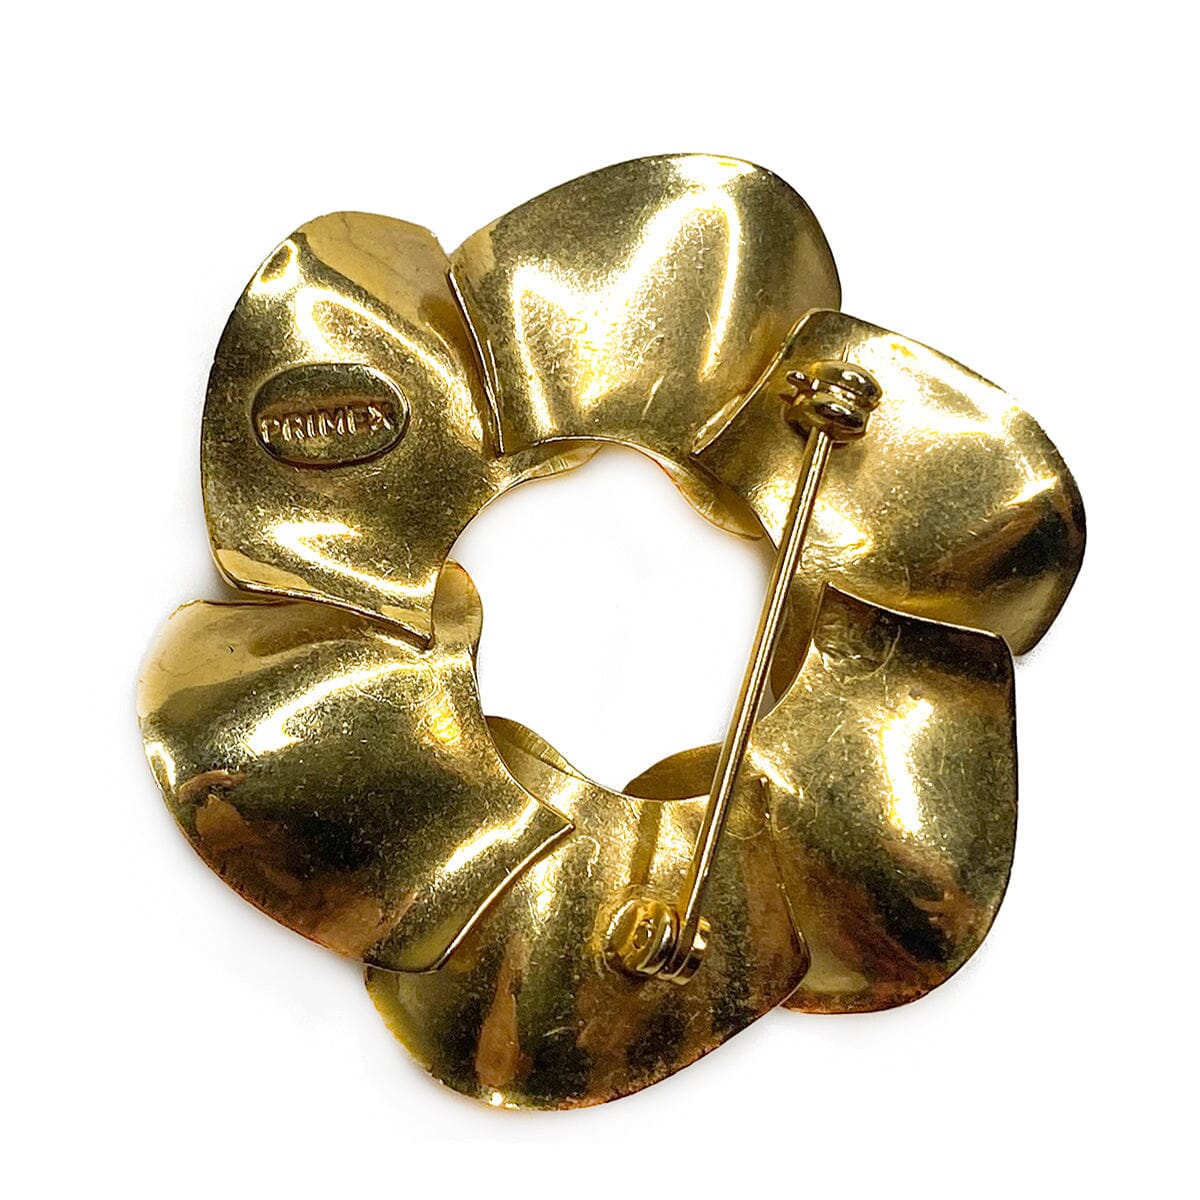 Great Lakes Boutique Primex Gold Plated Brooch